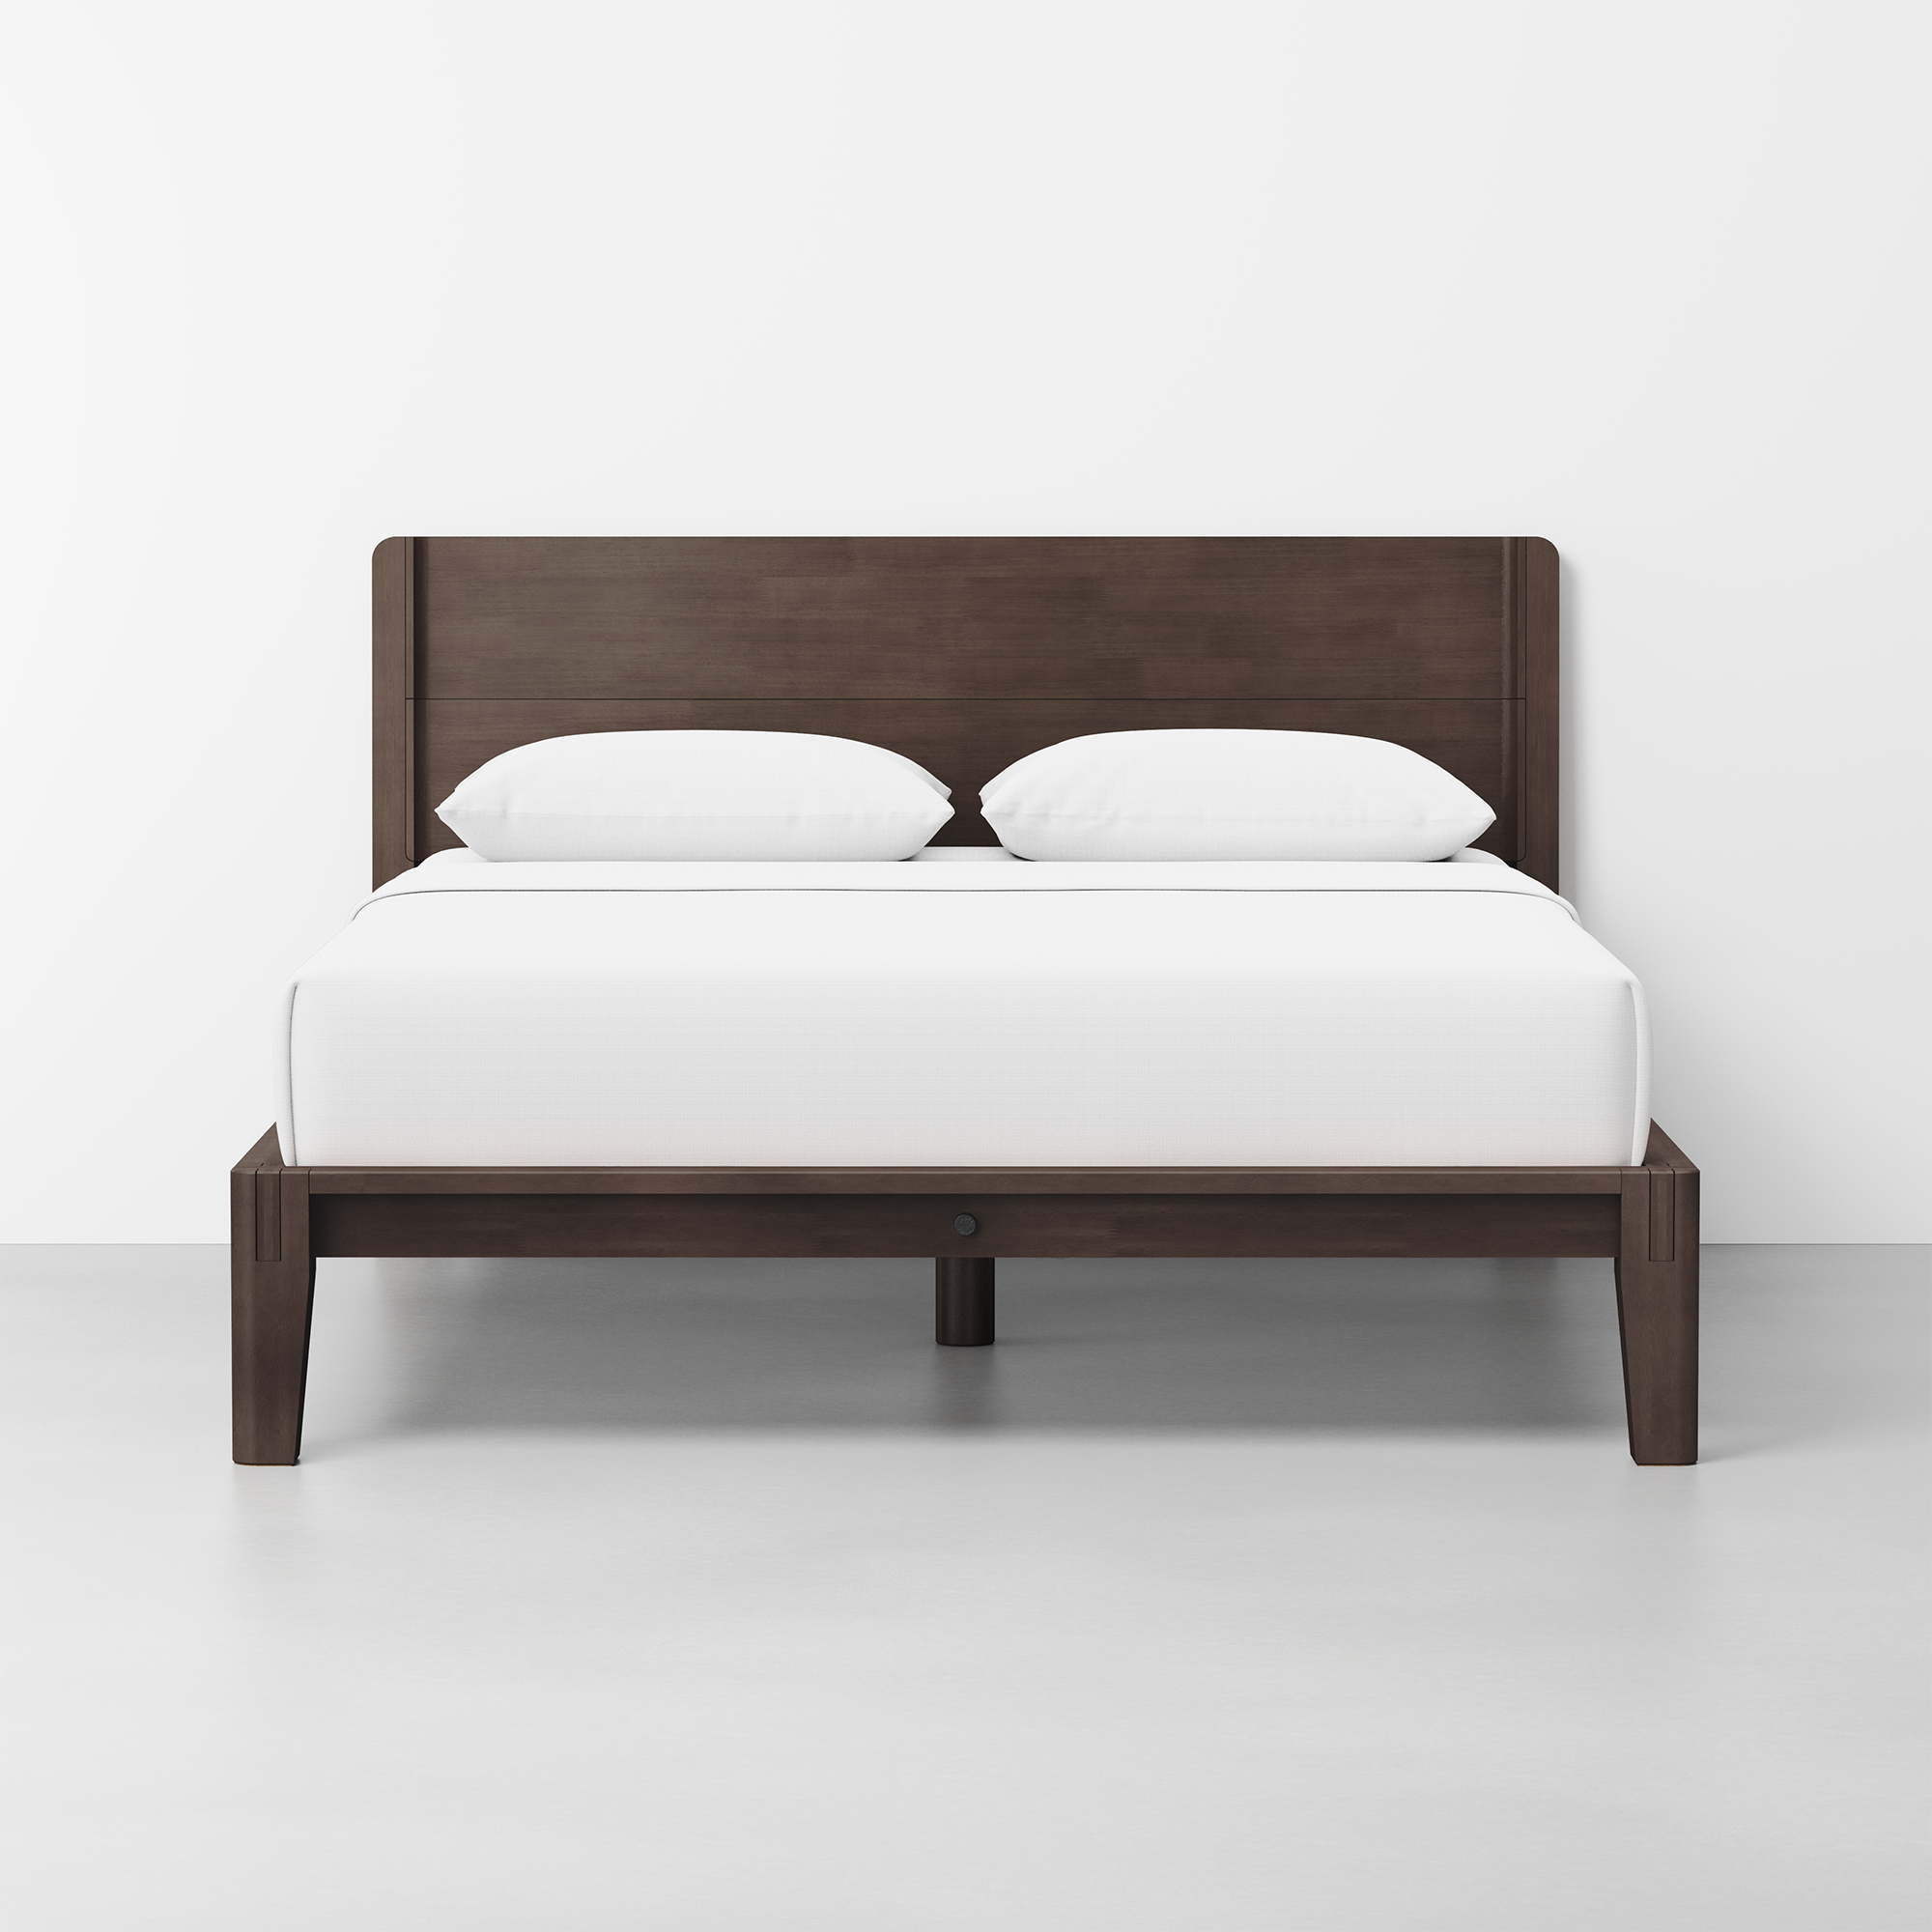 Espresso Cali King Bed The Bed with Headboard + Cushion - Beds | Thuma